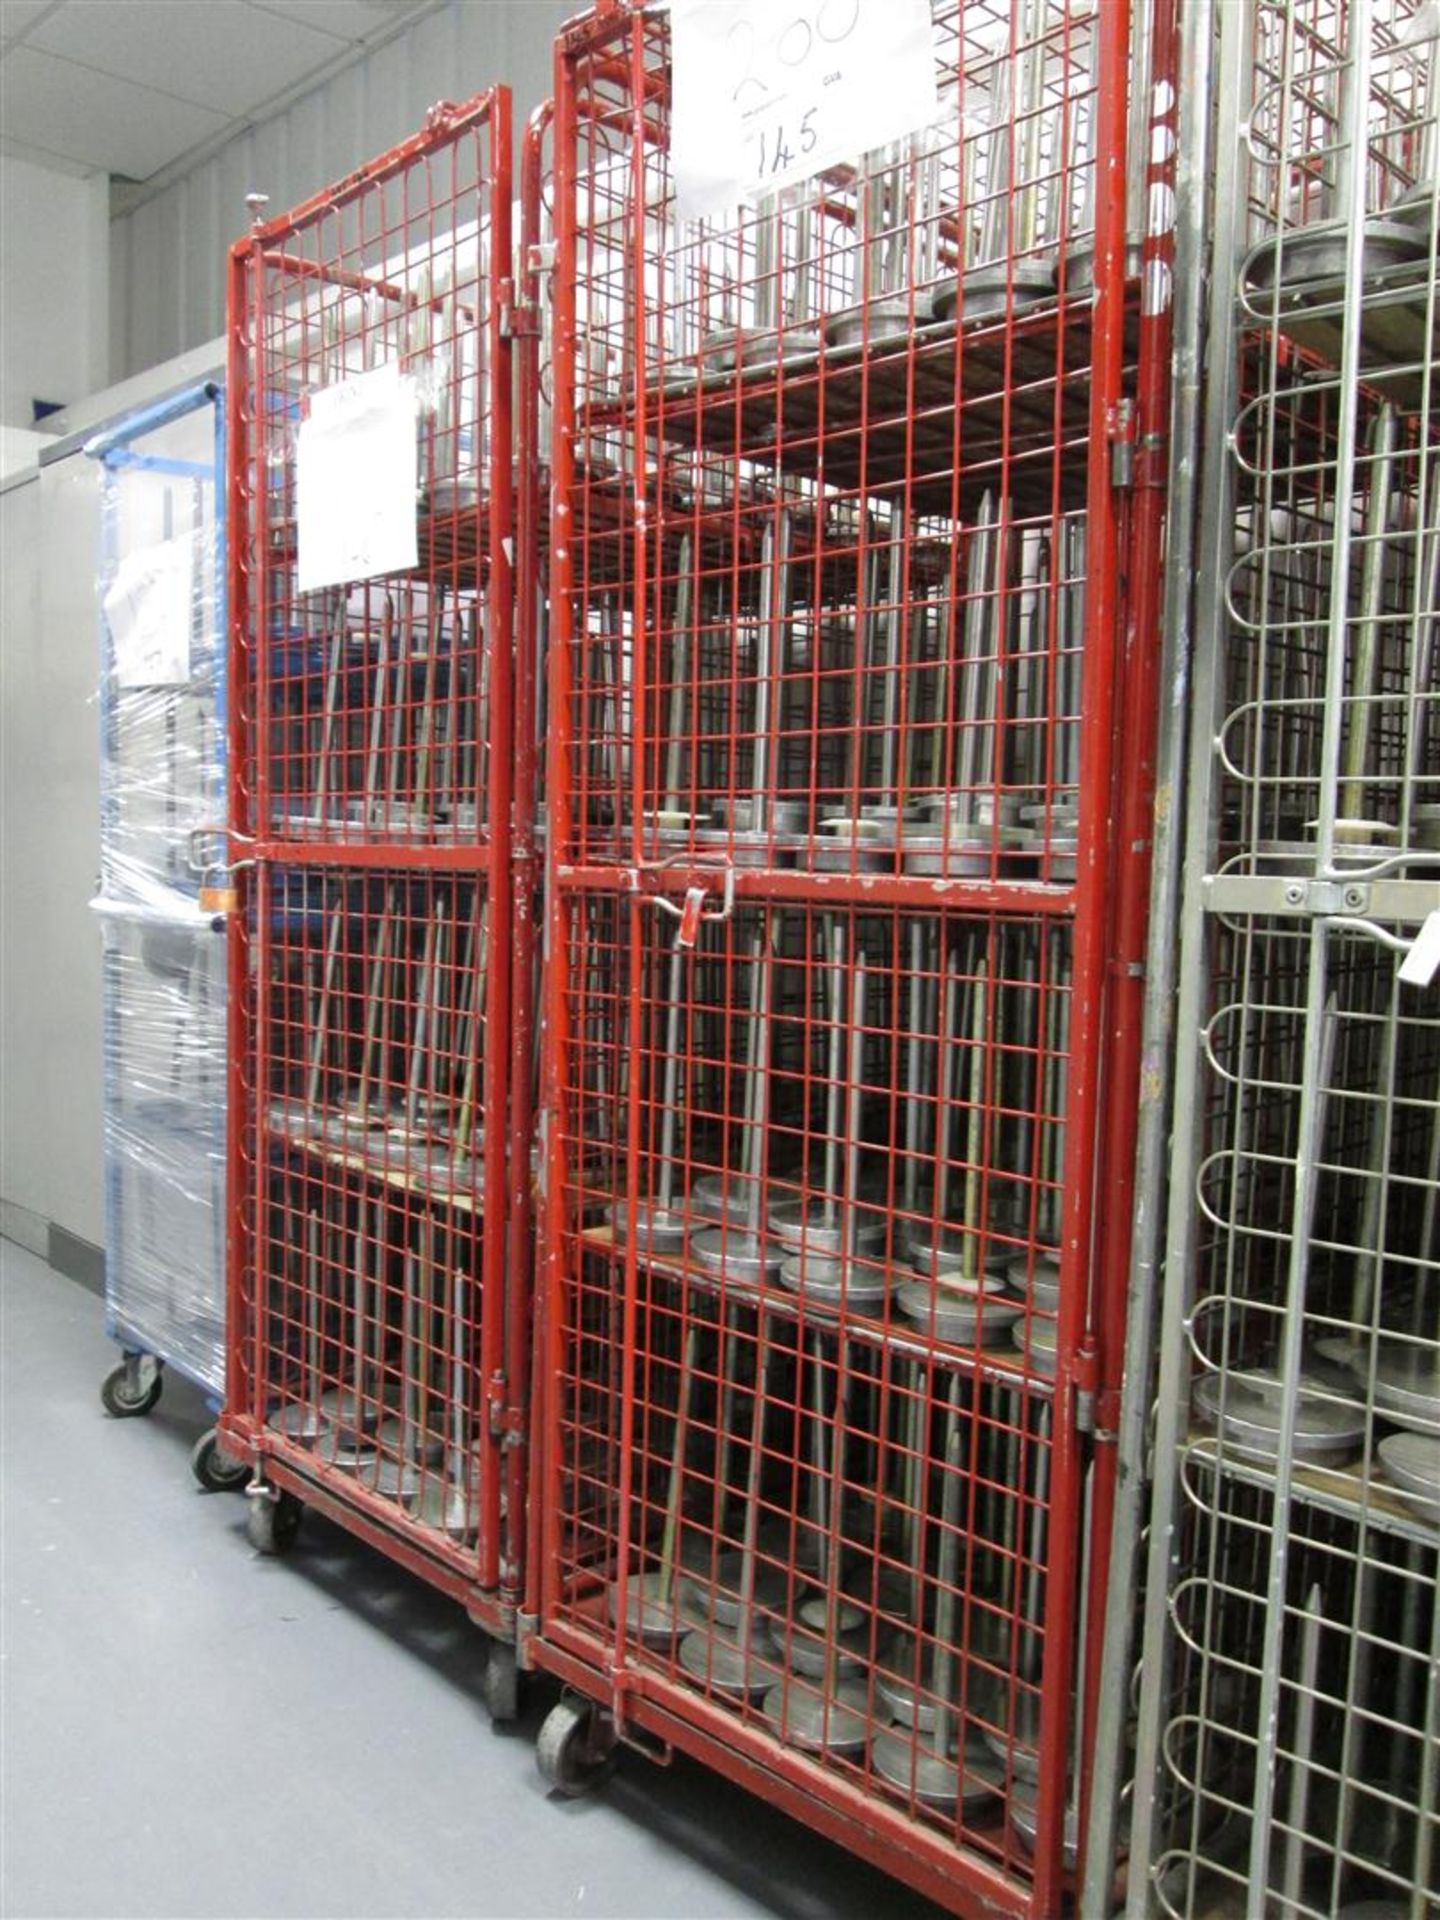 Trolley and contents (200: CD / DVD spindles (aluminium base / stainless steel spindle)

Note:

This